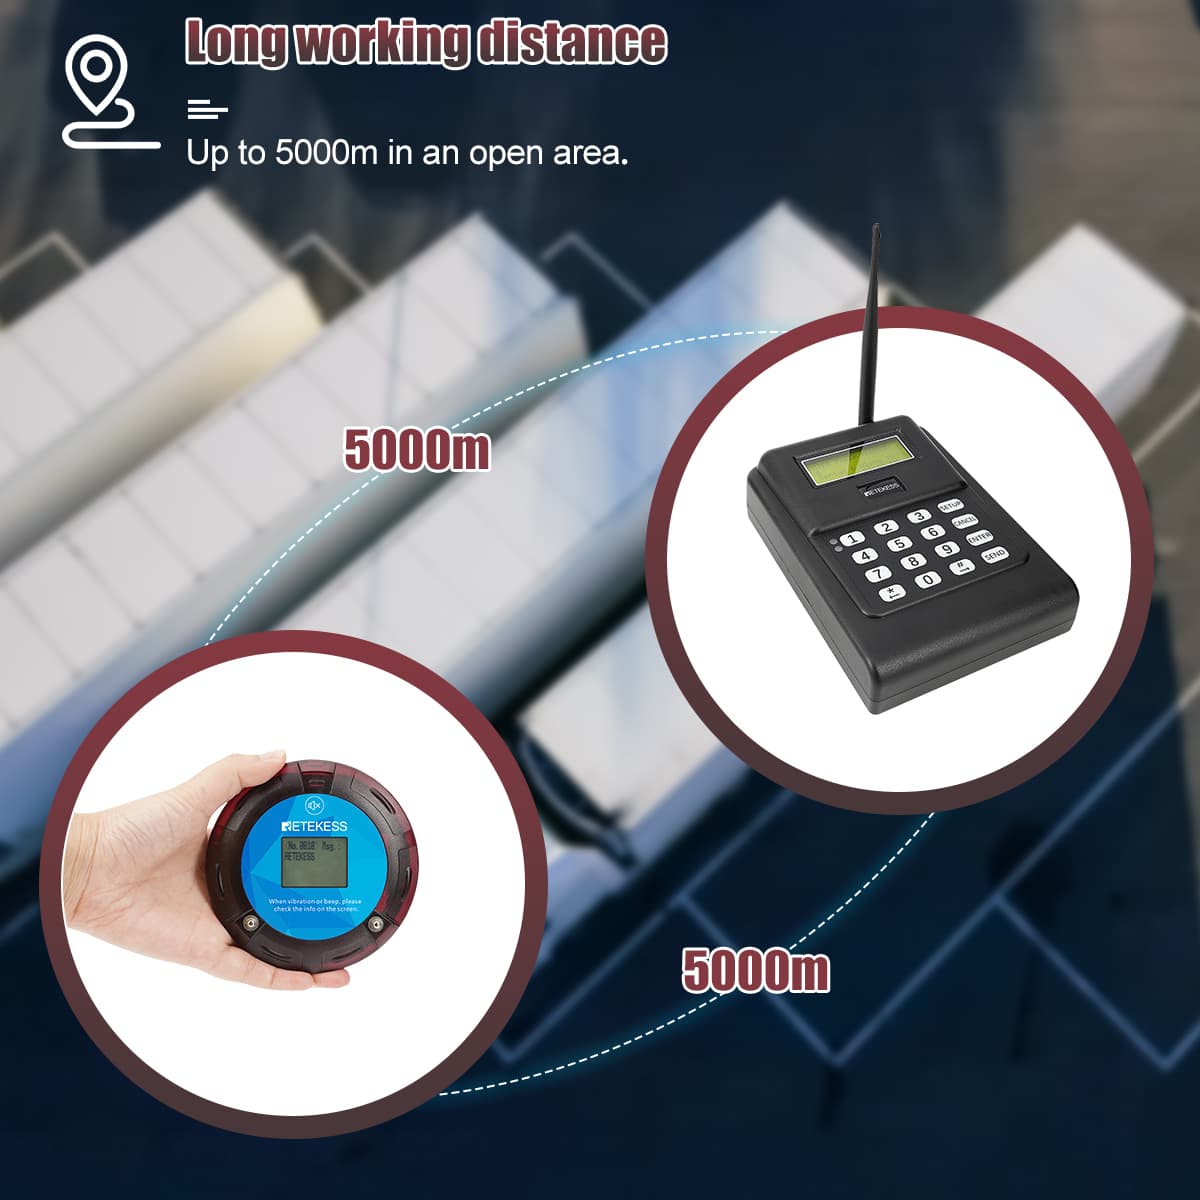 TD166 Alphanumeric Pager Long Range Paging System for Manufacturing & Warehouses.